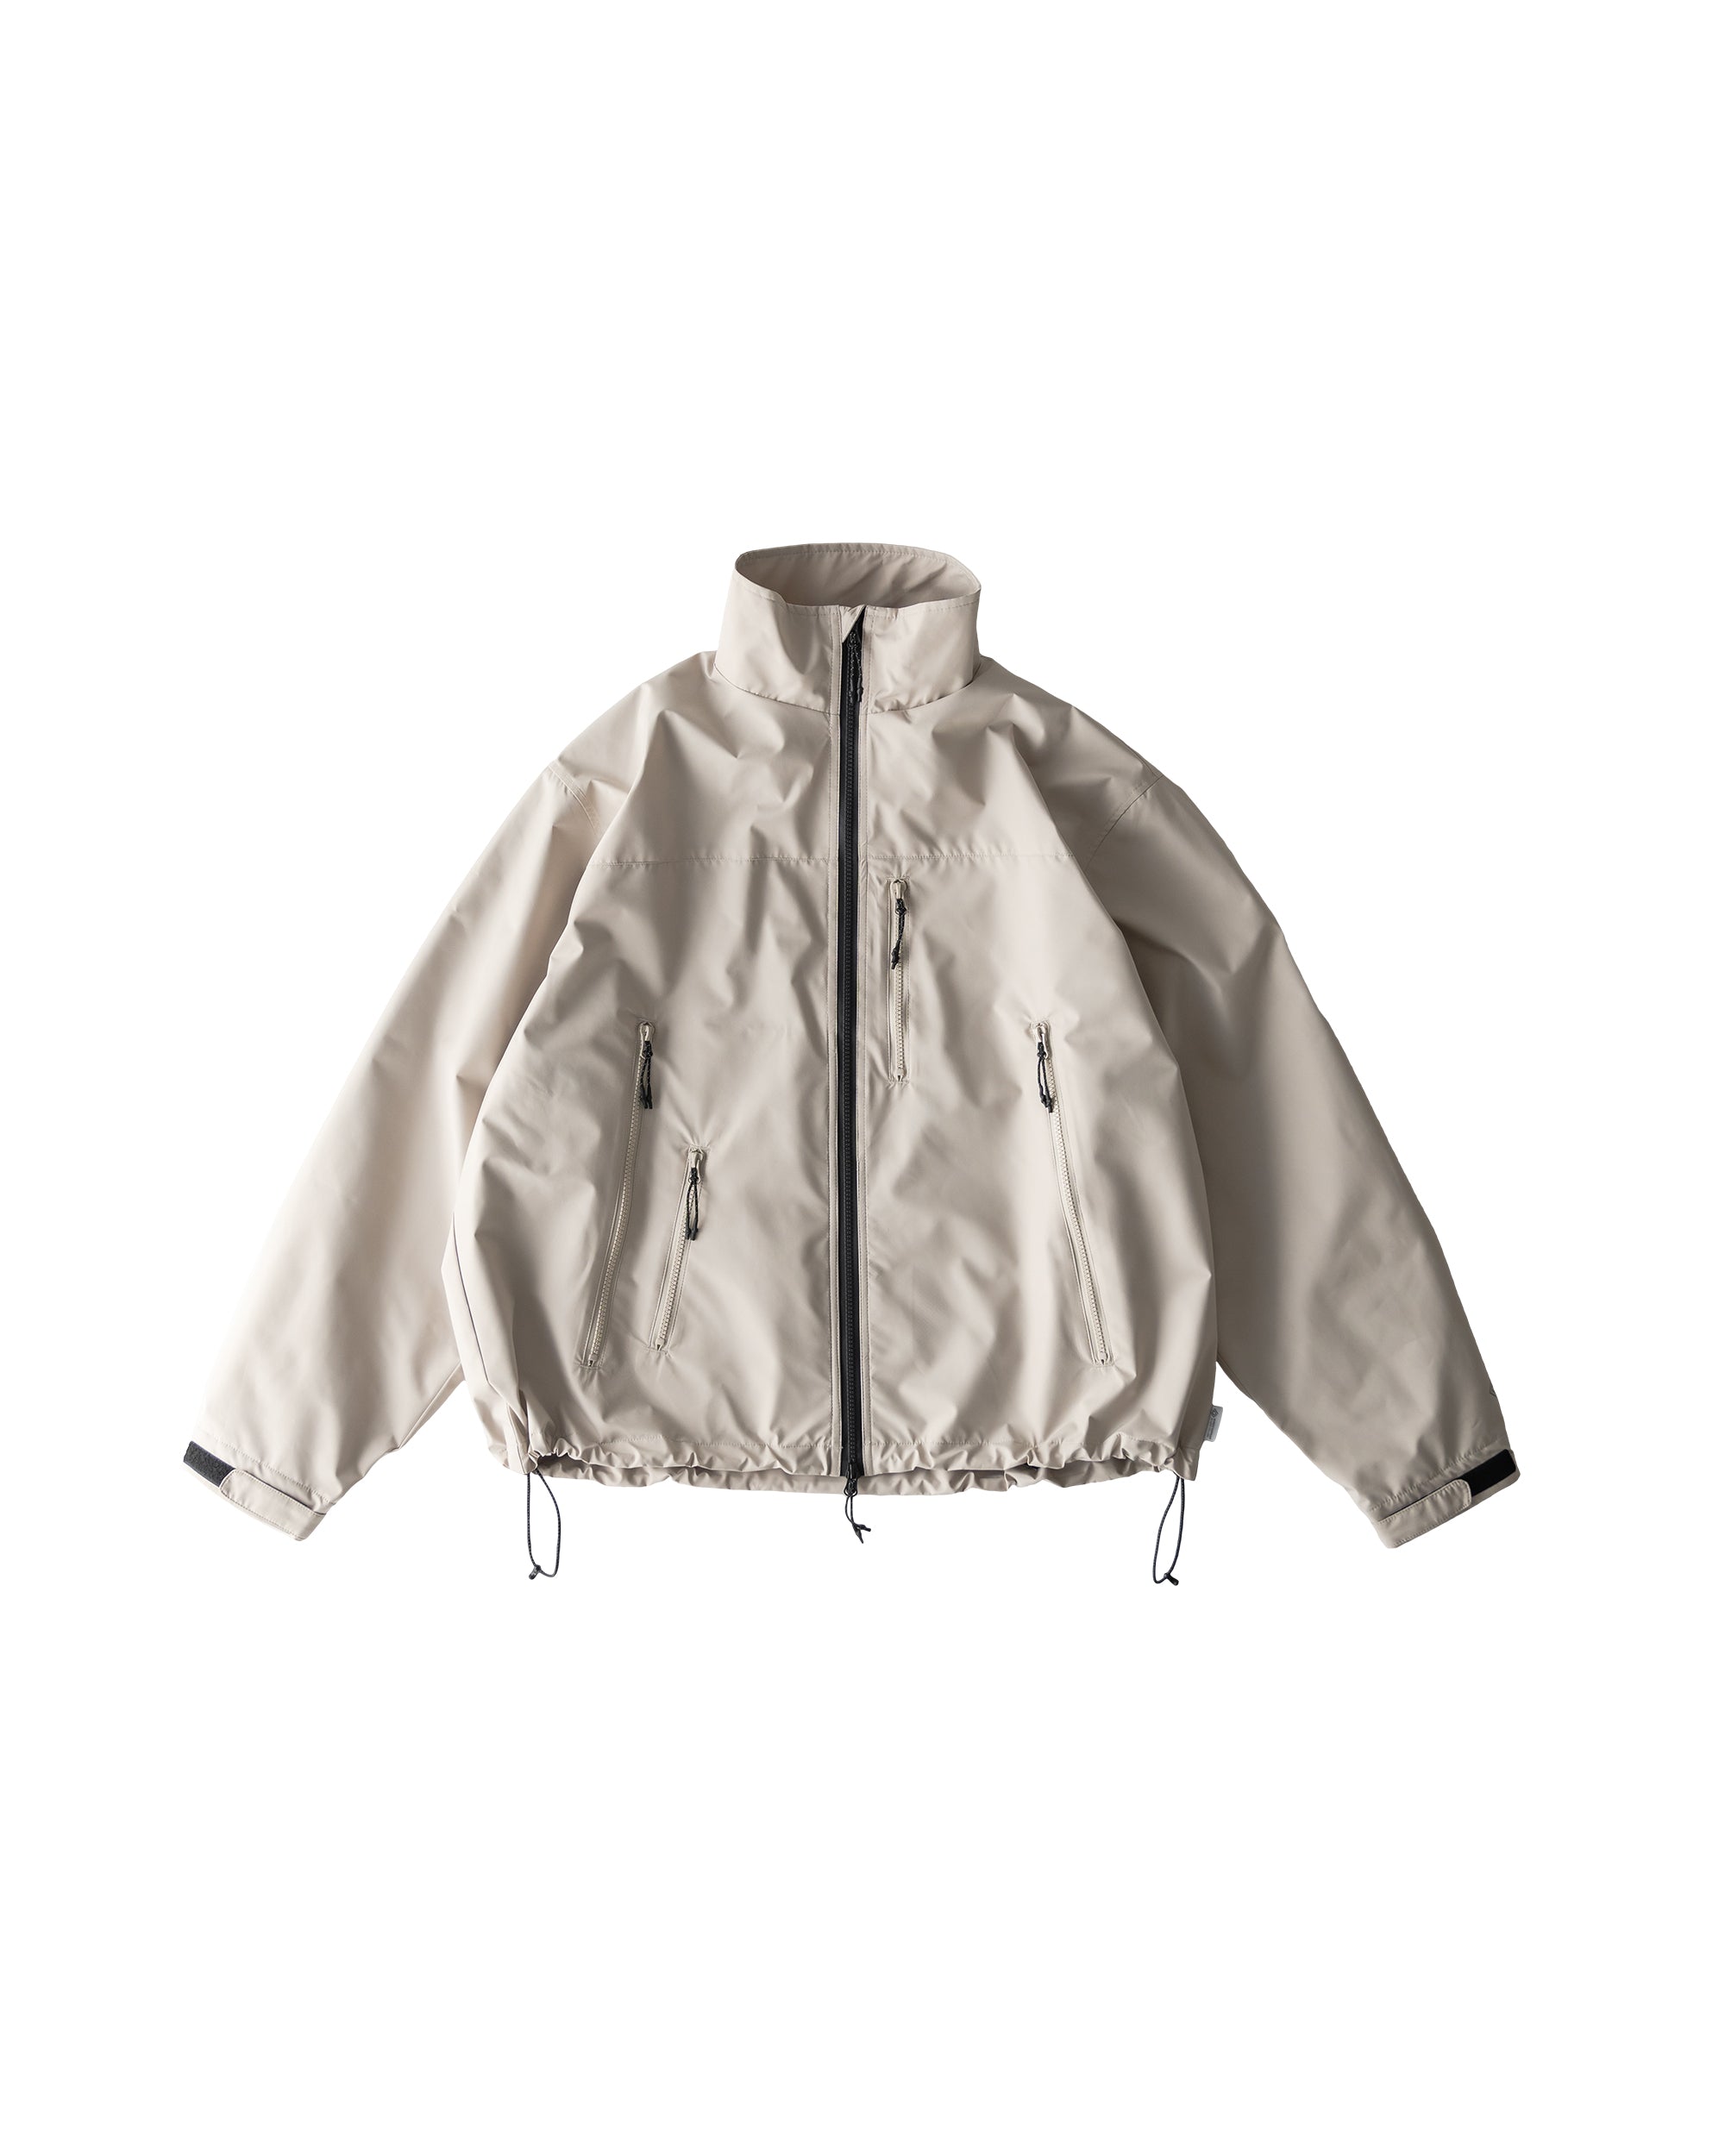 【2.28 wed 20:00- In stock】+phenix WINDSTOPPER® by GORE-TEX LABS CITY SETUP